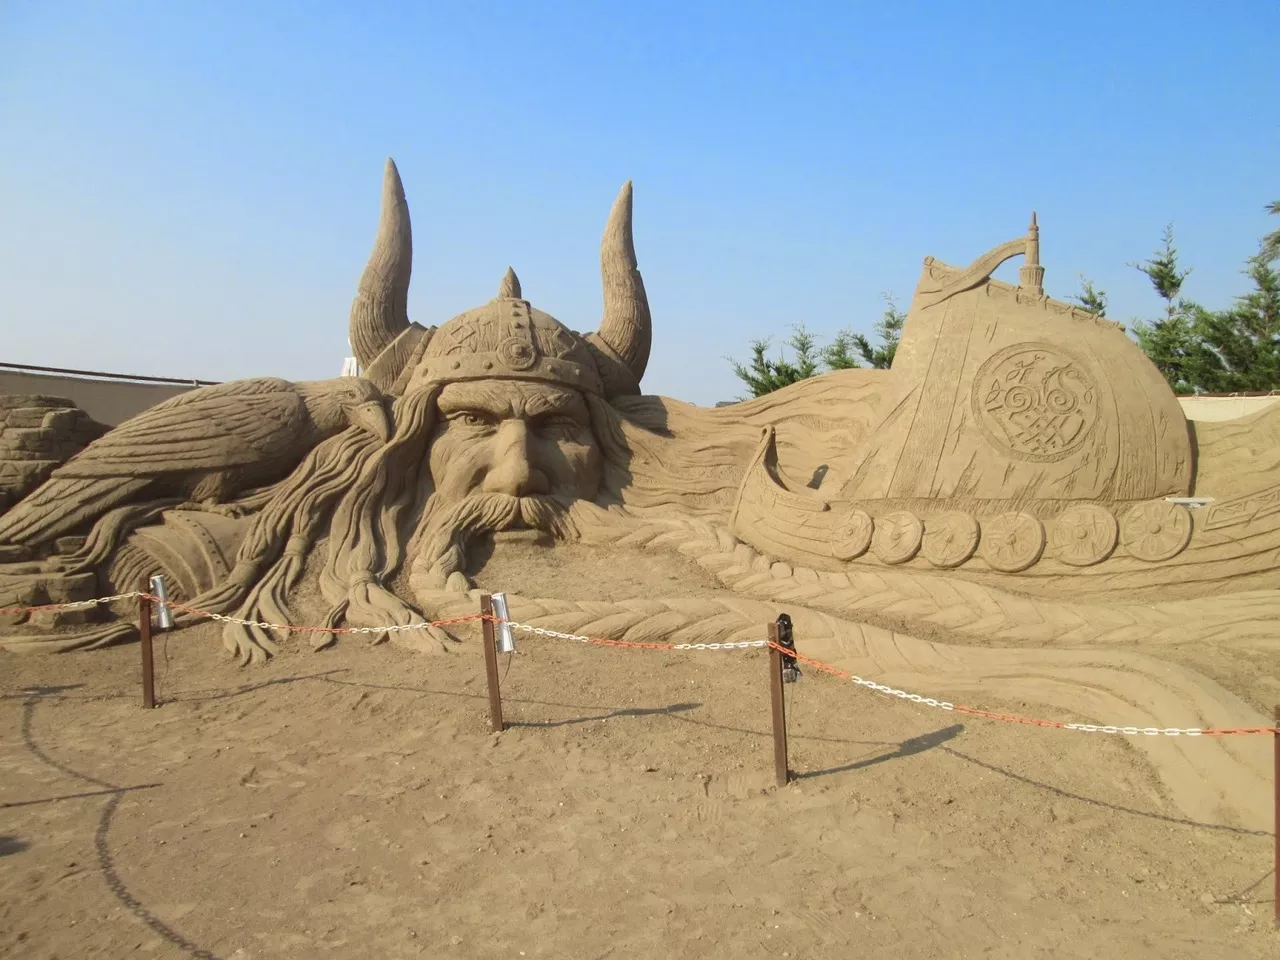 Sandland in Turkey, Central Asia | Museums - Rated 3.3